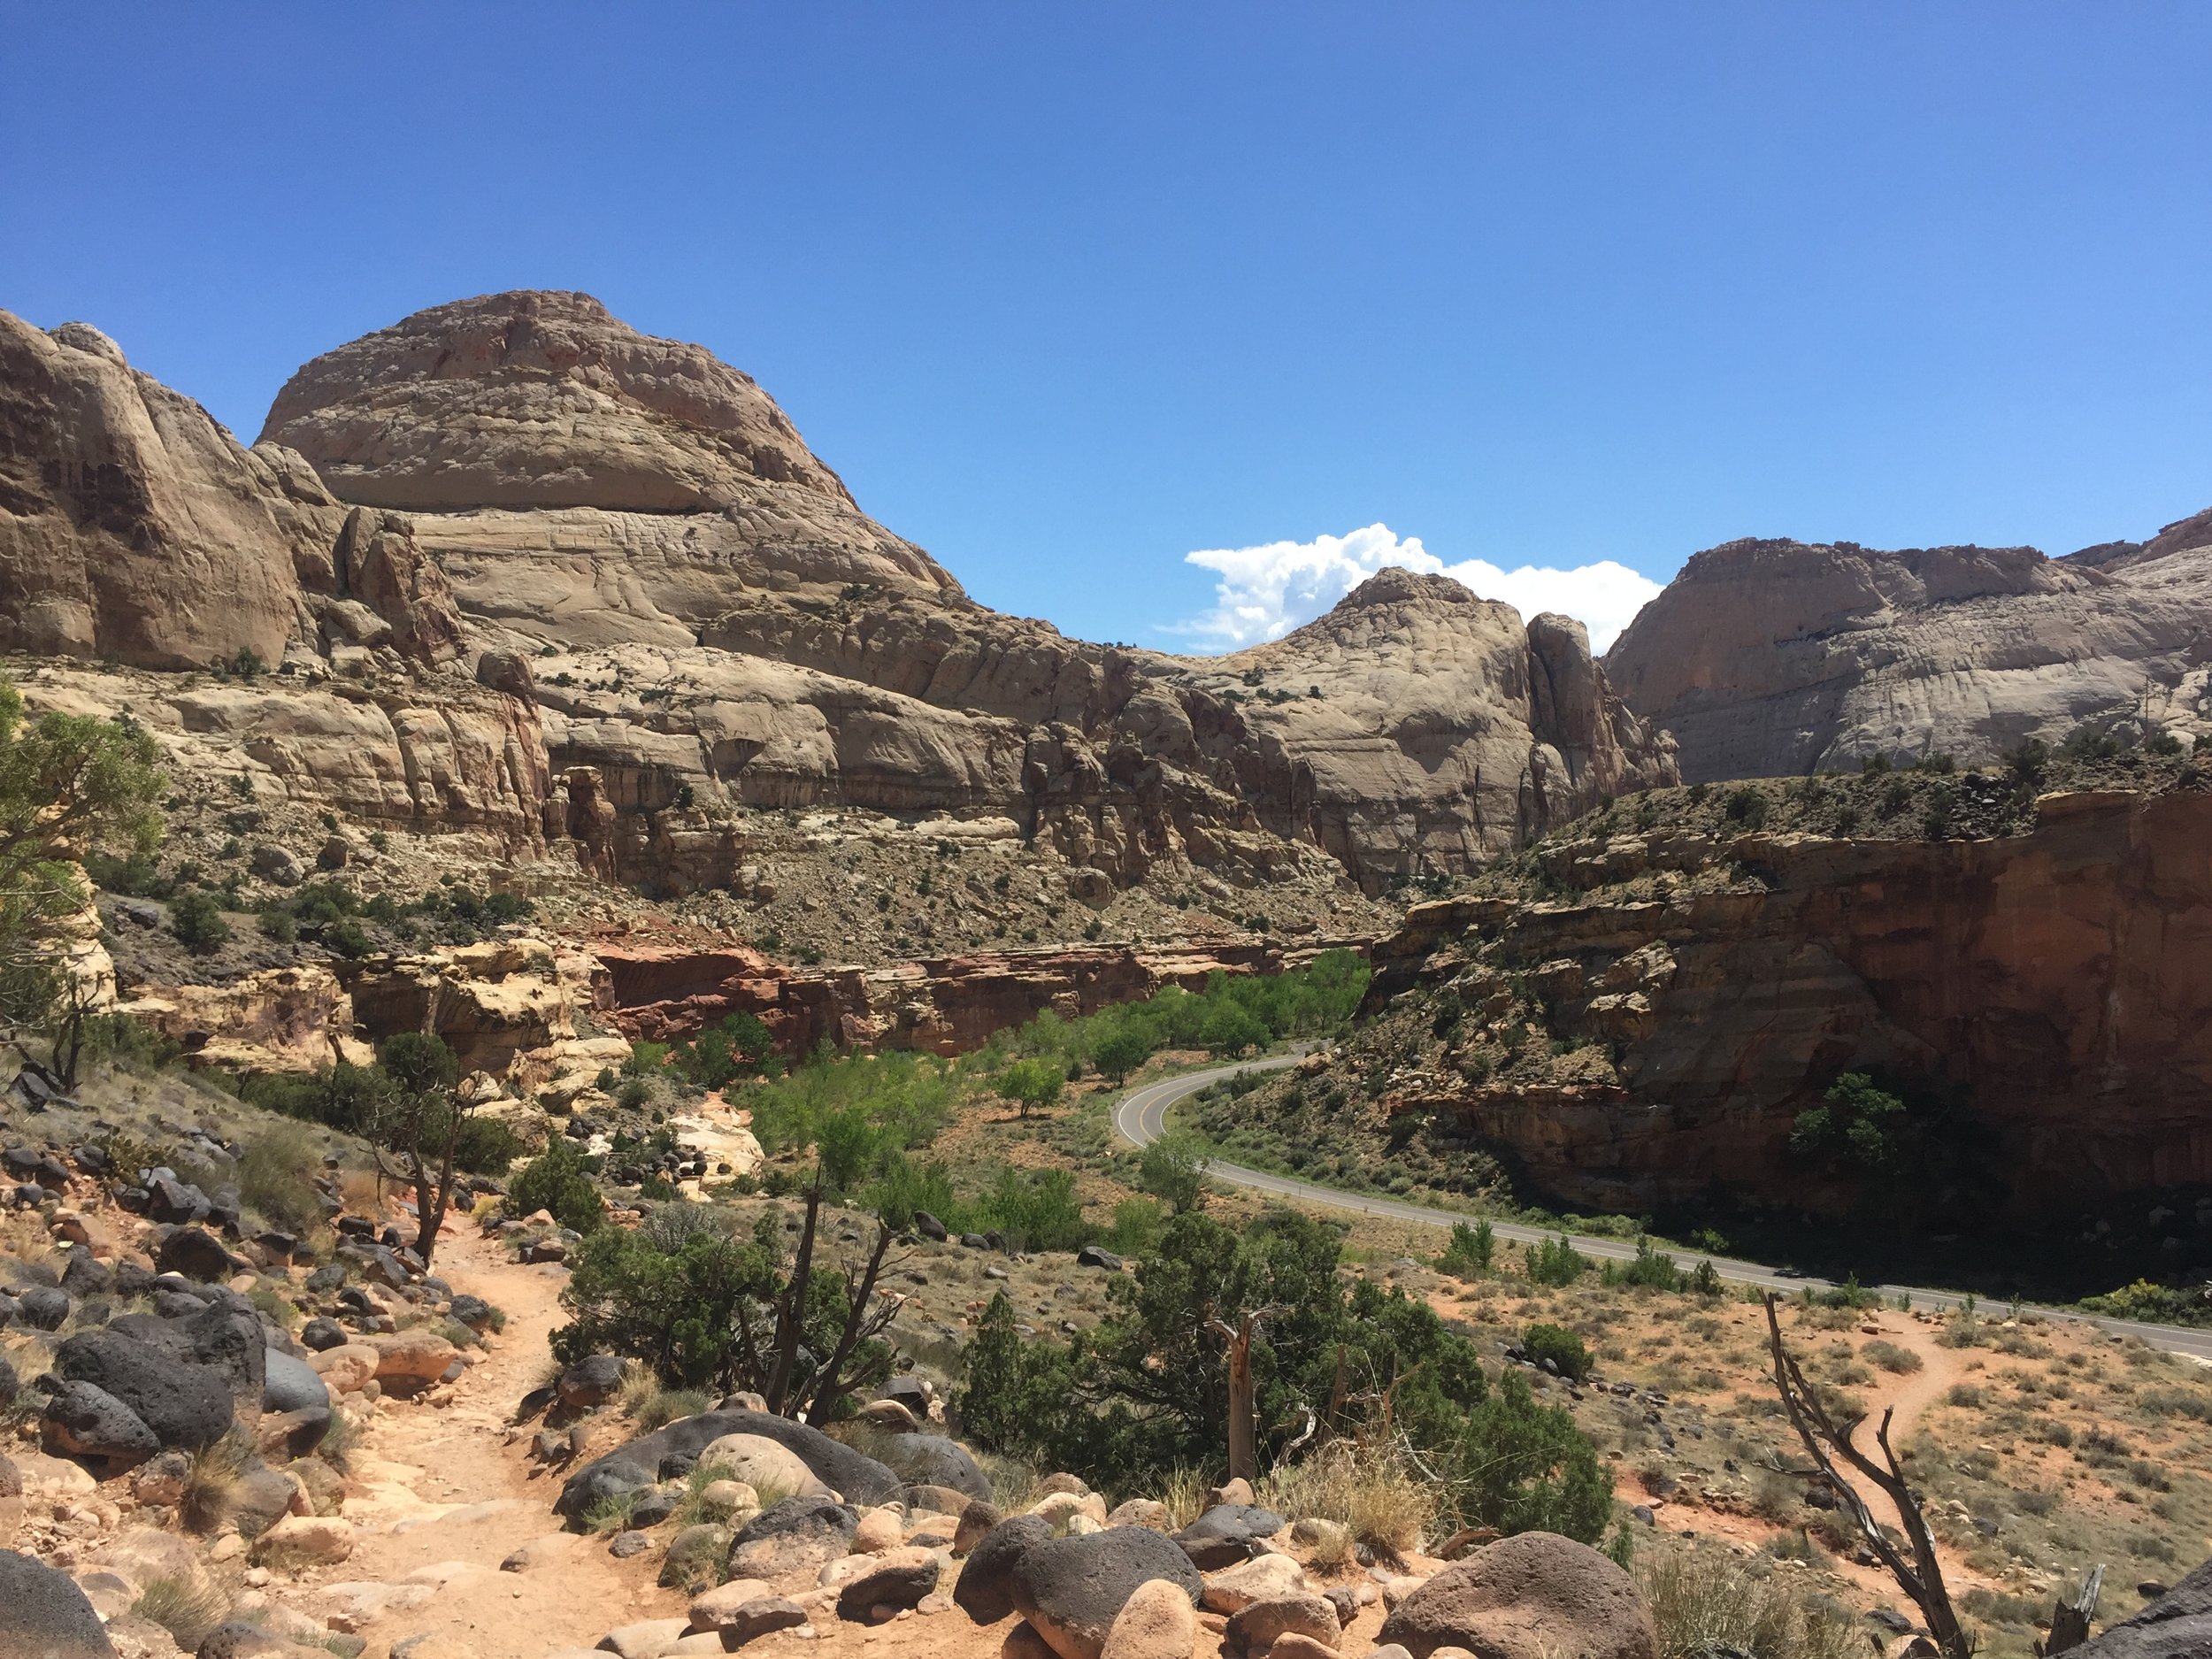   AUGUST, 2017 – CAPITOL REEF NATIONAL PARK: Pictured: Navajo sandstone cliffs form cathedral-esque domes which early surveyors thought resembled the dome of the capital building in Washington D.C.  